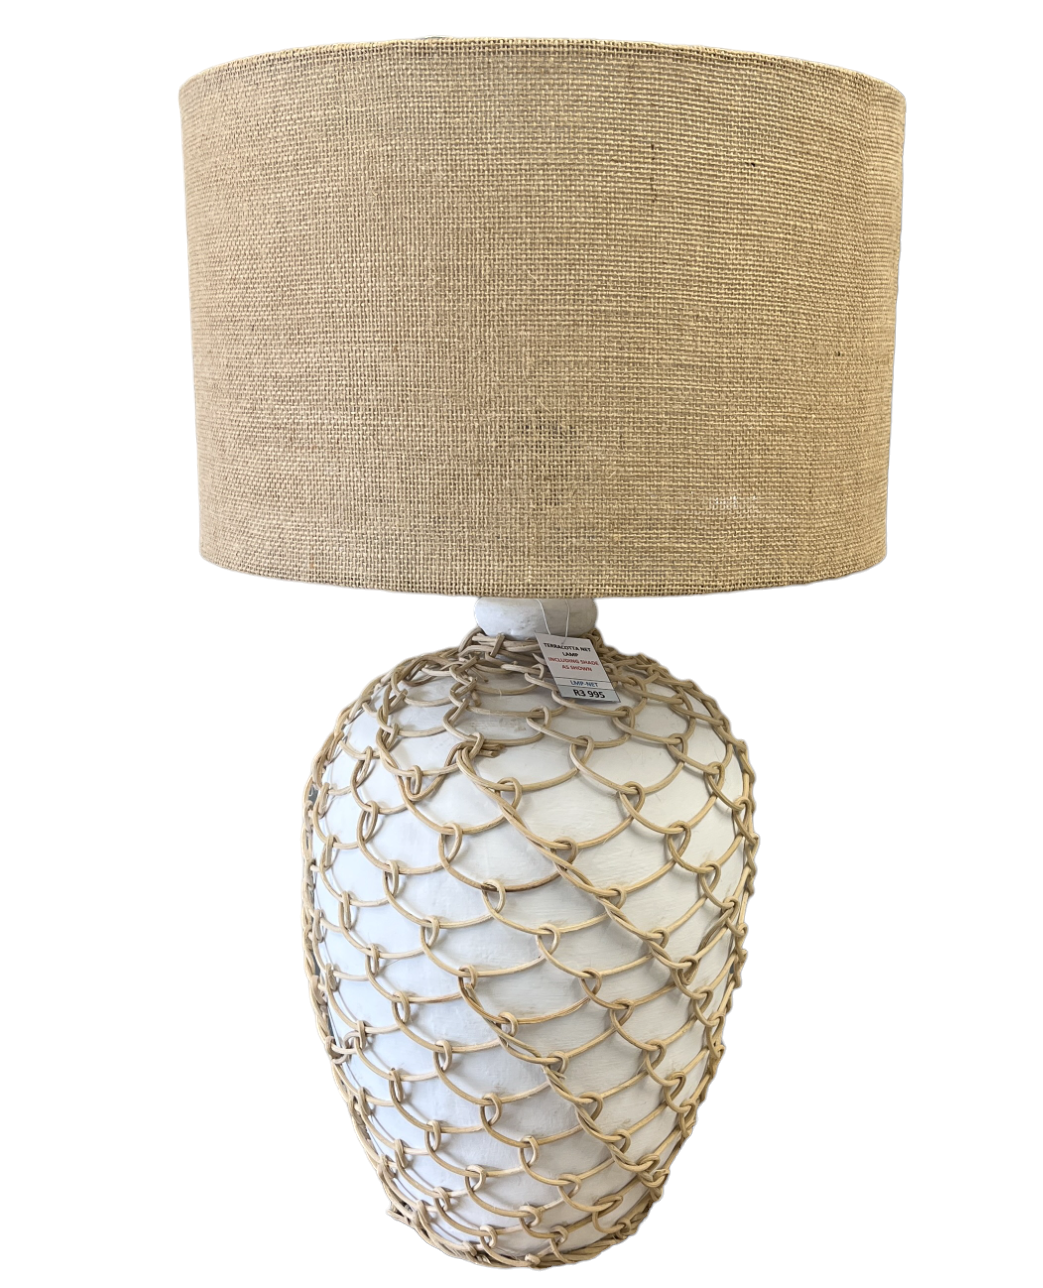 Table Lamp Terracotta and Net